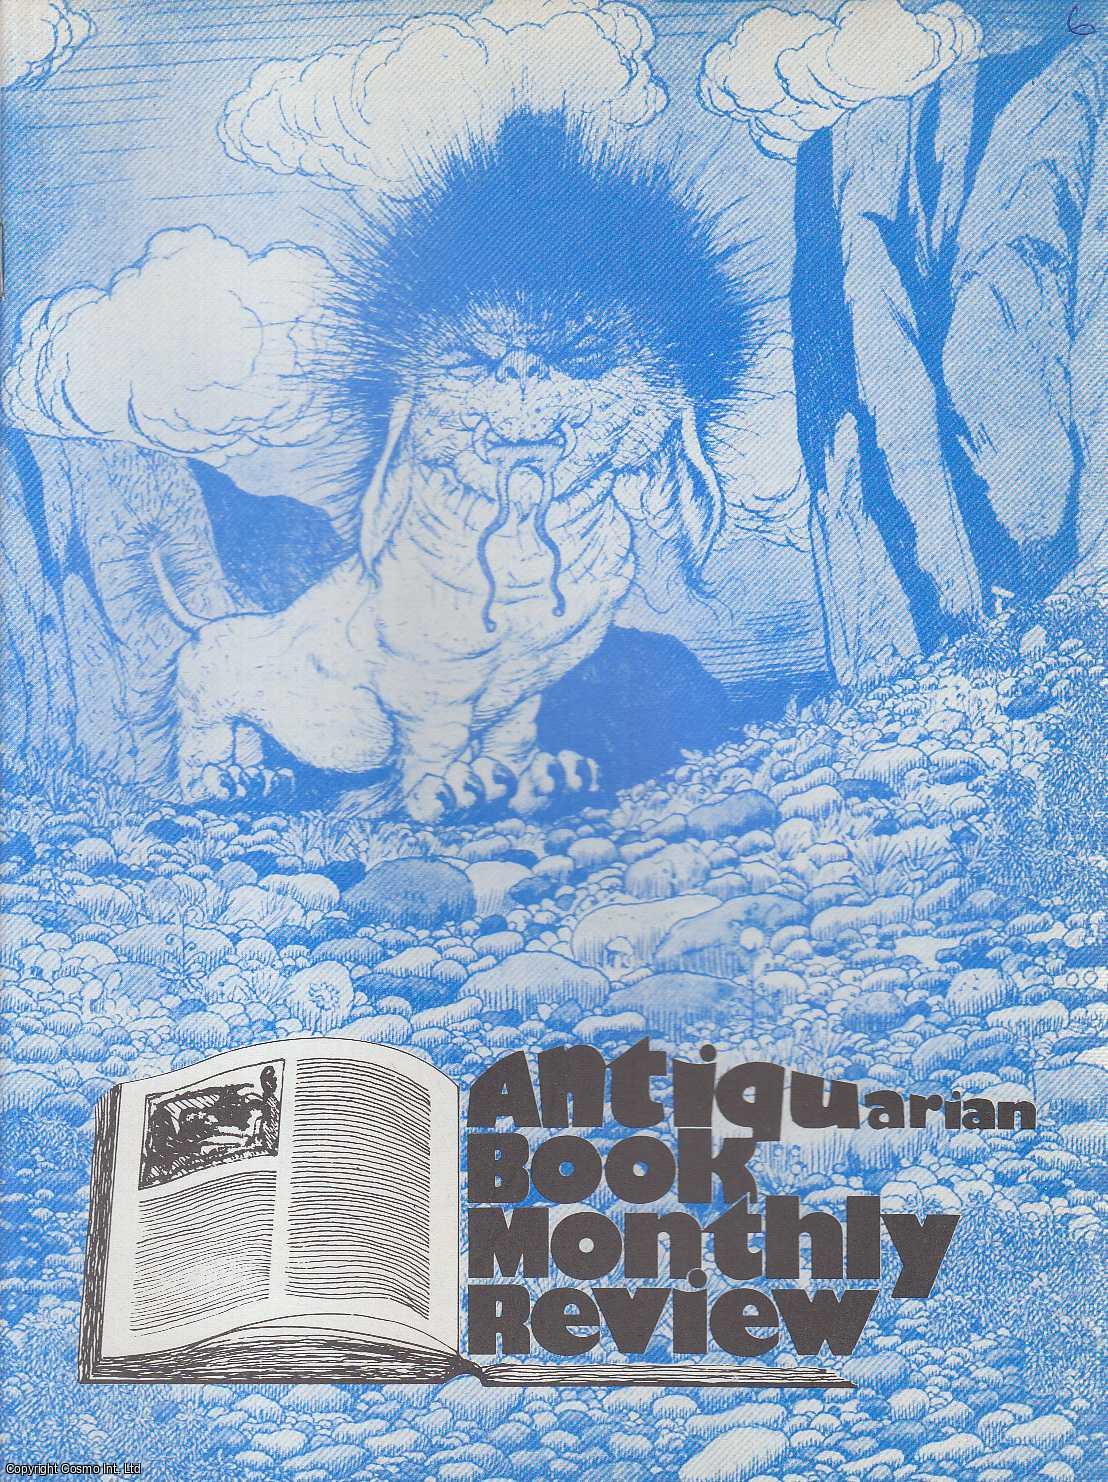 ABMR - Antiquarian Book Monthly Review. Issue No. 6 for July 1974. An original complete monthly issue of the Antiquarian Book Monthly Review, 1974.